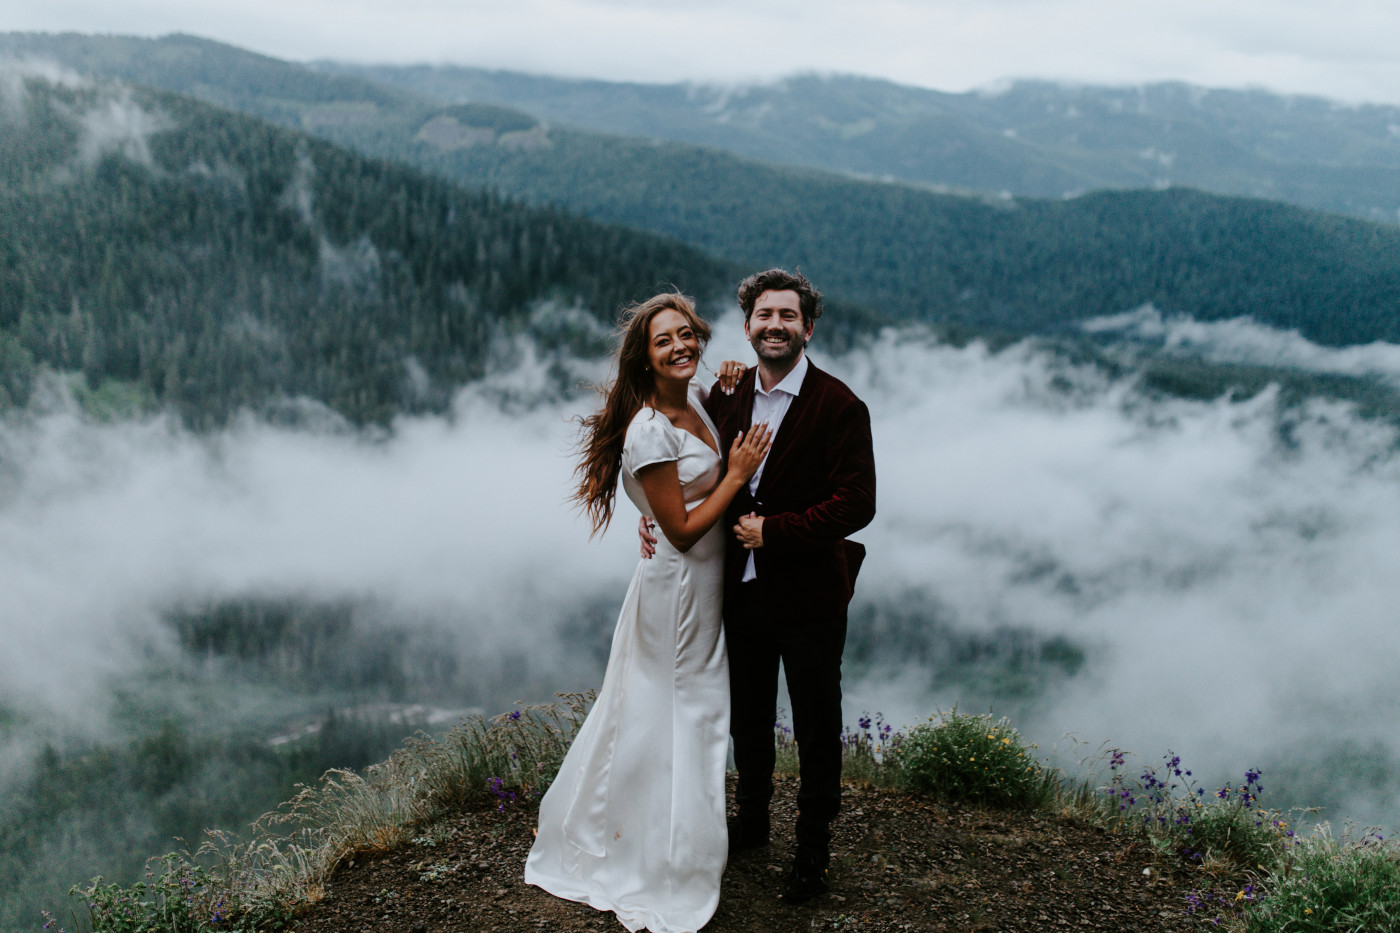 Katelyn and Murray stand with an expansive view of the woods behind them. Elopement wedding photography at Mount Hood by Sienna Plus Josh.